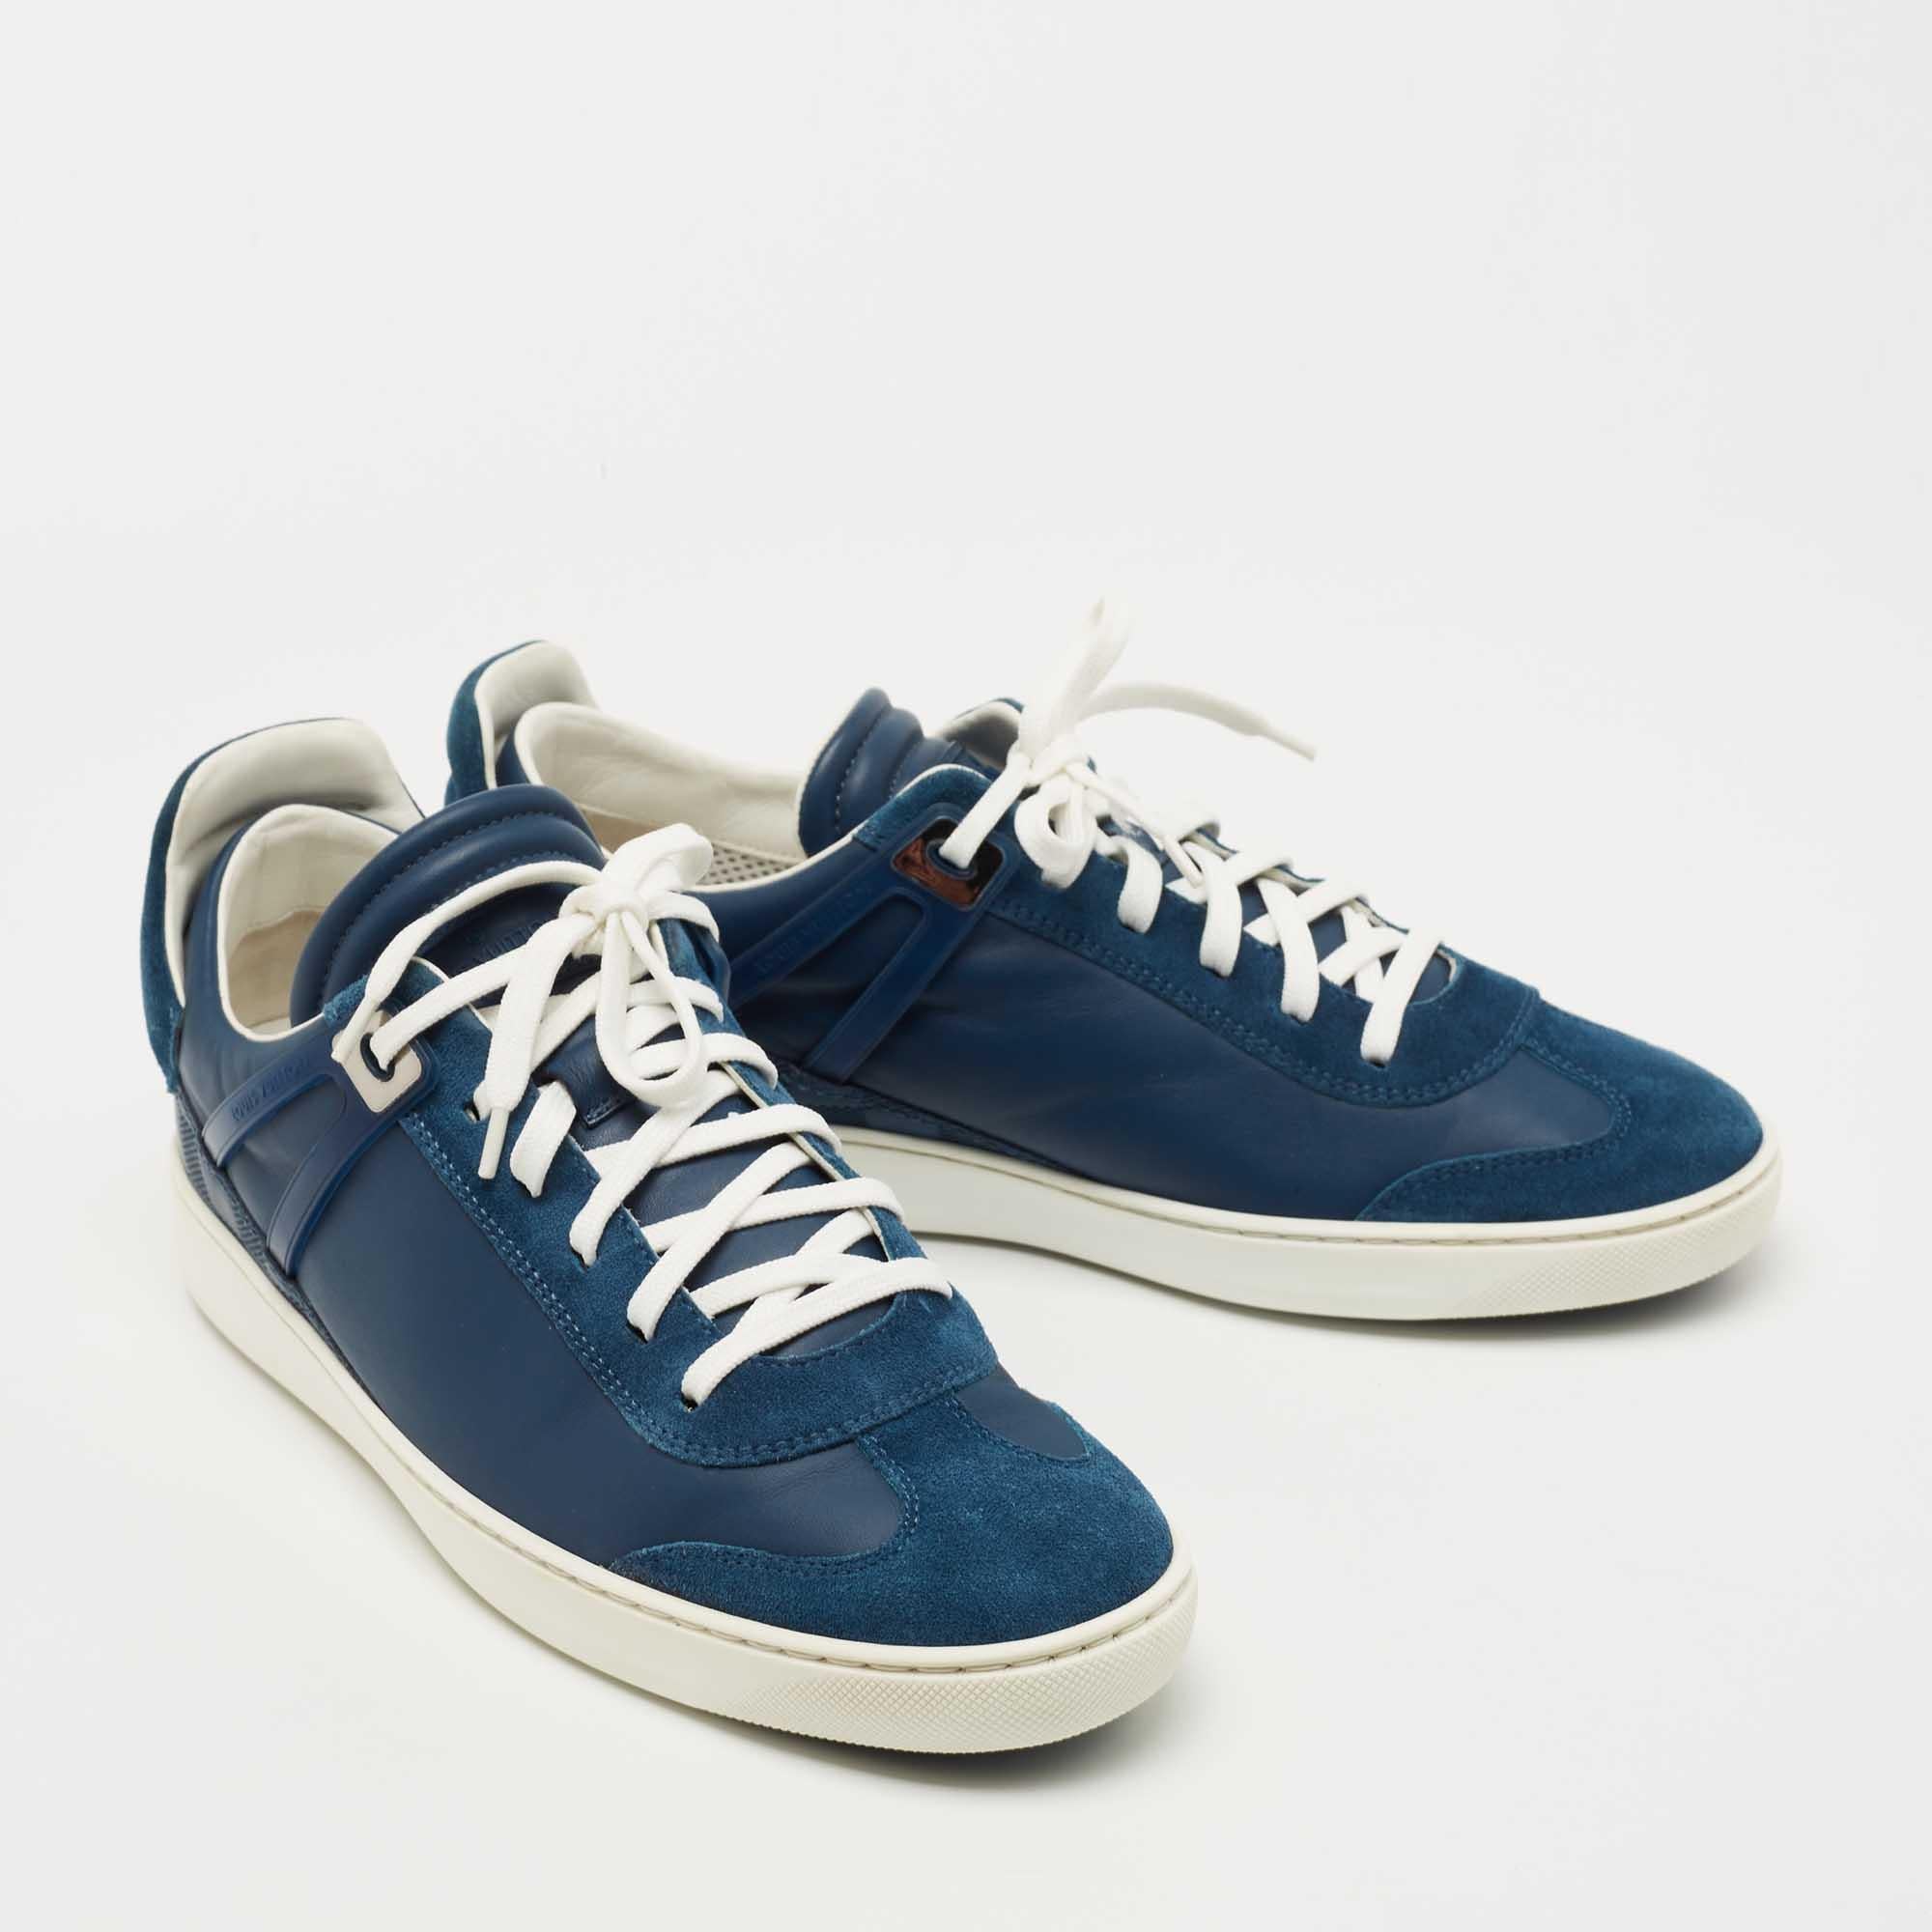 Louis Vuitton Blue Leather and Suede Low Top Sneakers Size 40.5 In Good Condition For Sale In Dubai, Al Qouz 2